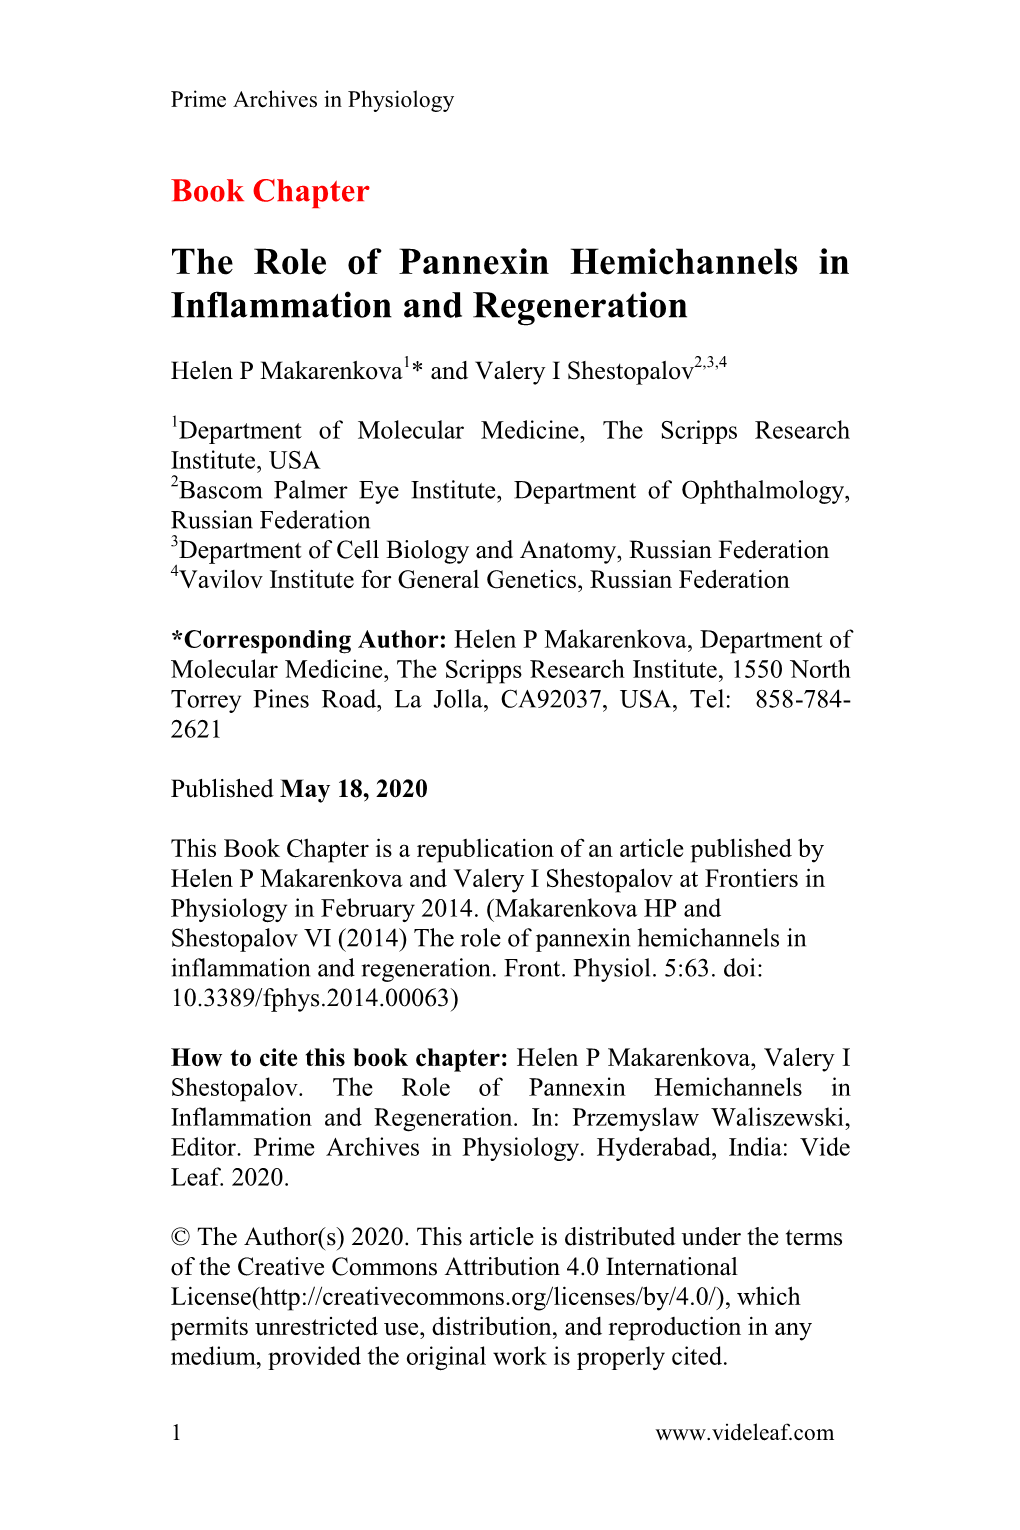 The Role of Pannexin Hemichannels in Inflammation and Regeneration